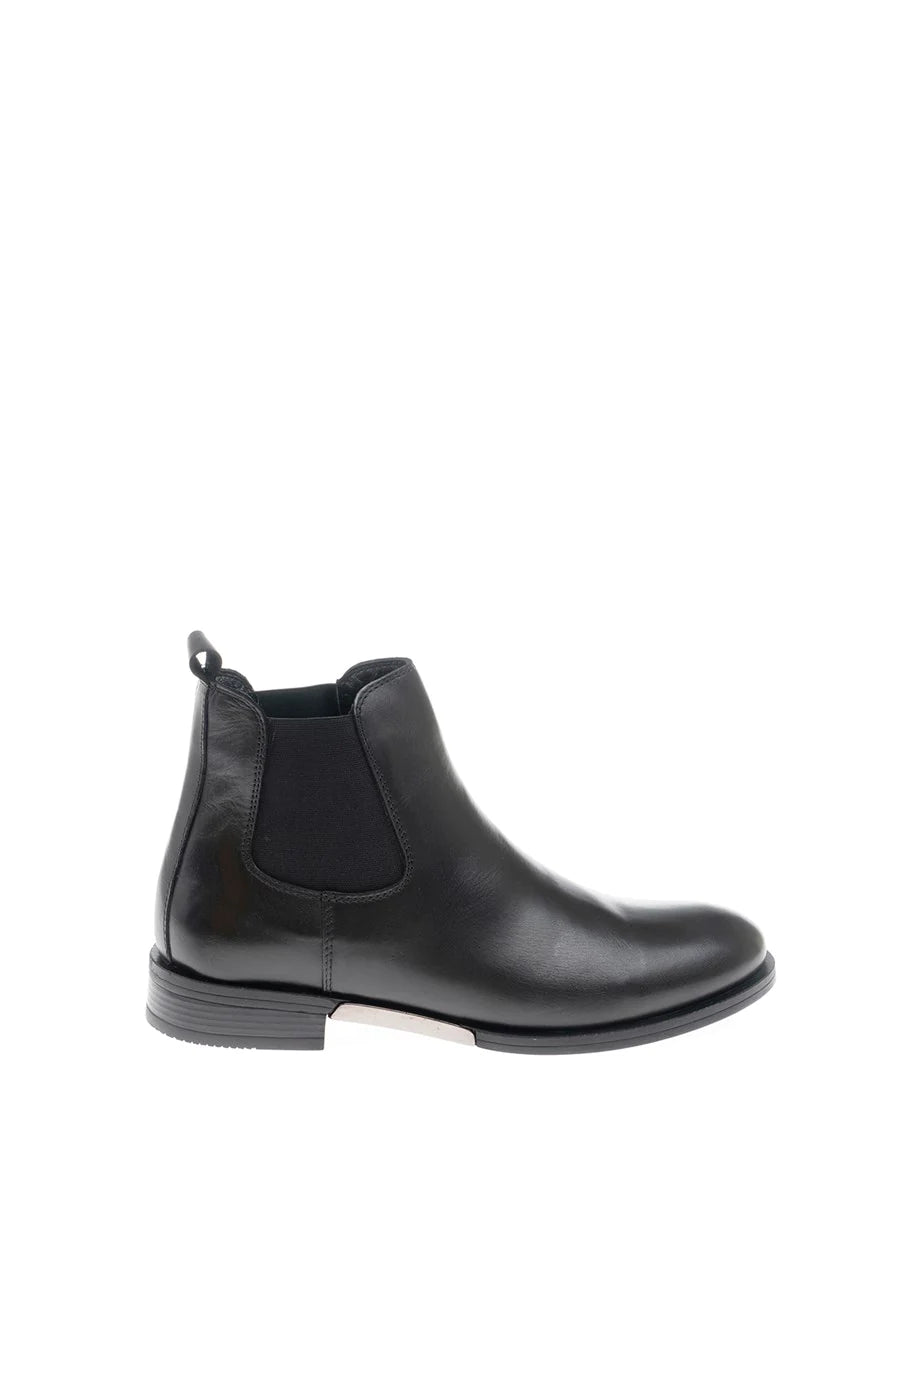 Harrison MenStyleWith Special Edition Black Chelsea Boots